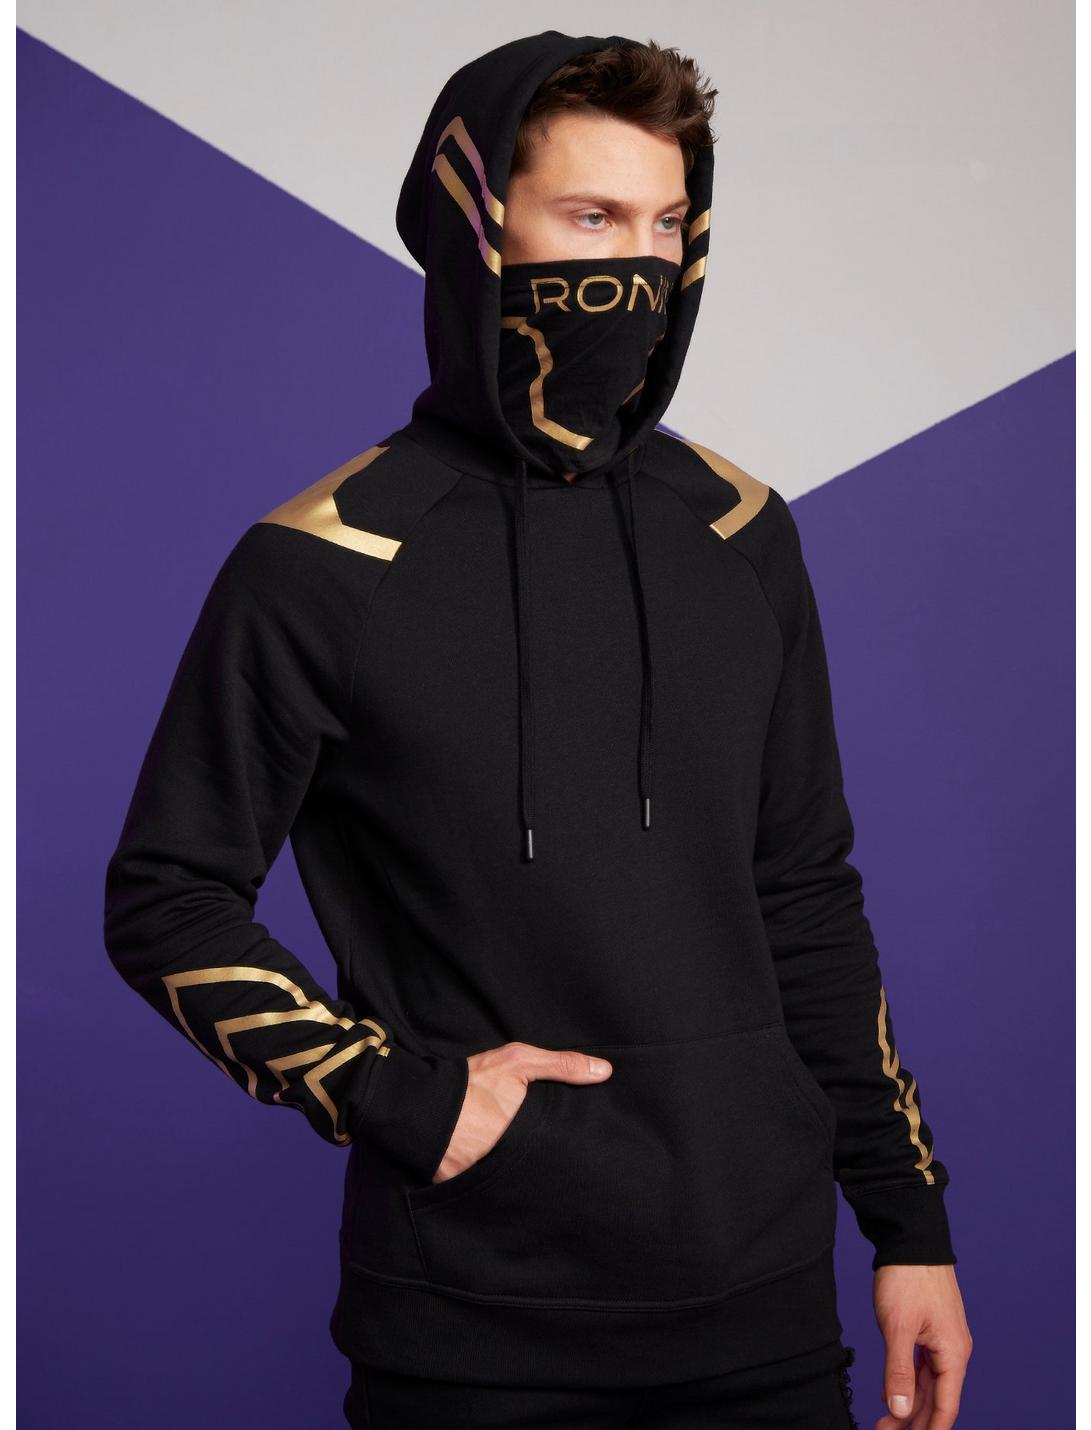 Our Universe Marvel Hawkeye Ronin Mask Hoodie, GOLD, hi-res